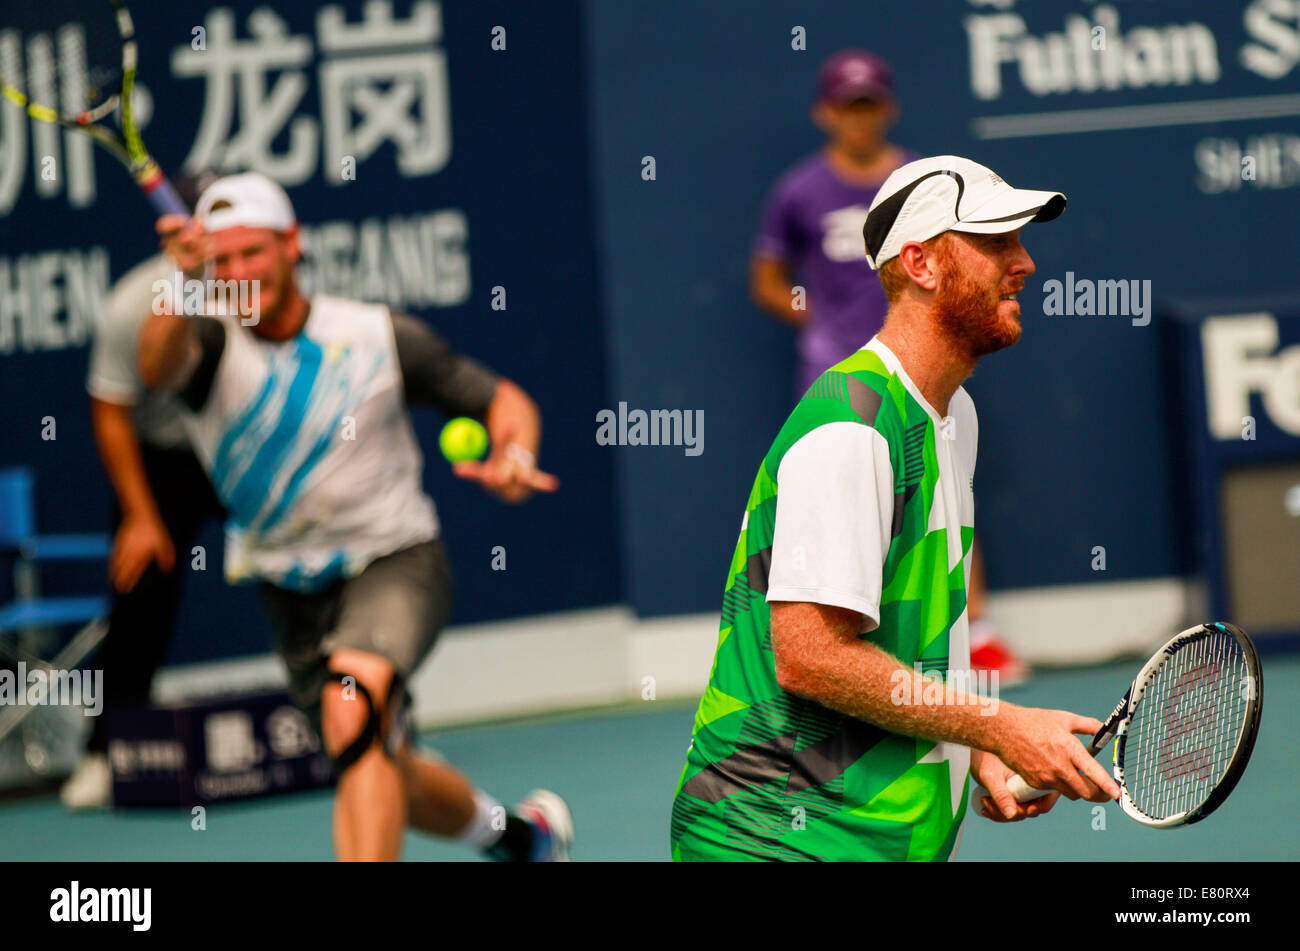 Shenzhen, China's Guangdong Province. 28th Sep, 2014. Sam Groth (L) and Chris Guccione of Australia compete during the men's doubles final match against Jean-Julien Rojer of Netherlands and Horia Tecau of Romania at the ATP Shenzhen Open tennis tournament in Shenzhen, south China's Guangdong Province, on Sept. 28, 2014. Jean-Julien Rojer and Horia Tecau won 2-0 and claimed the title. Credit:  Mao Siqian/Xinhua/Alamy Live News Stock Photo